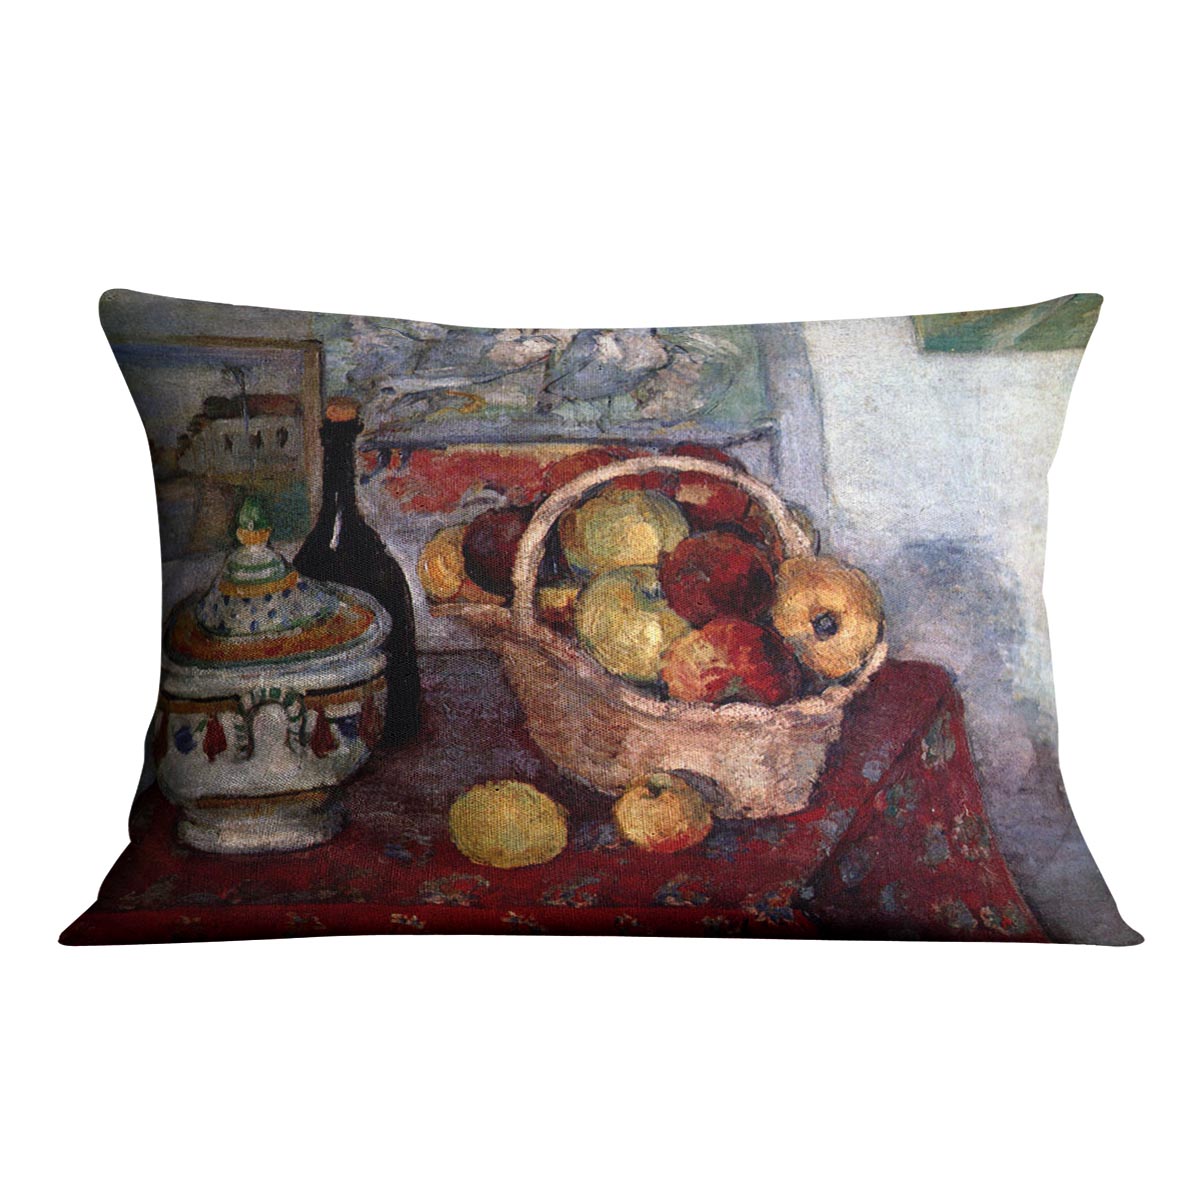 Still life with soup tureen by Cezanne Cushion